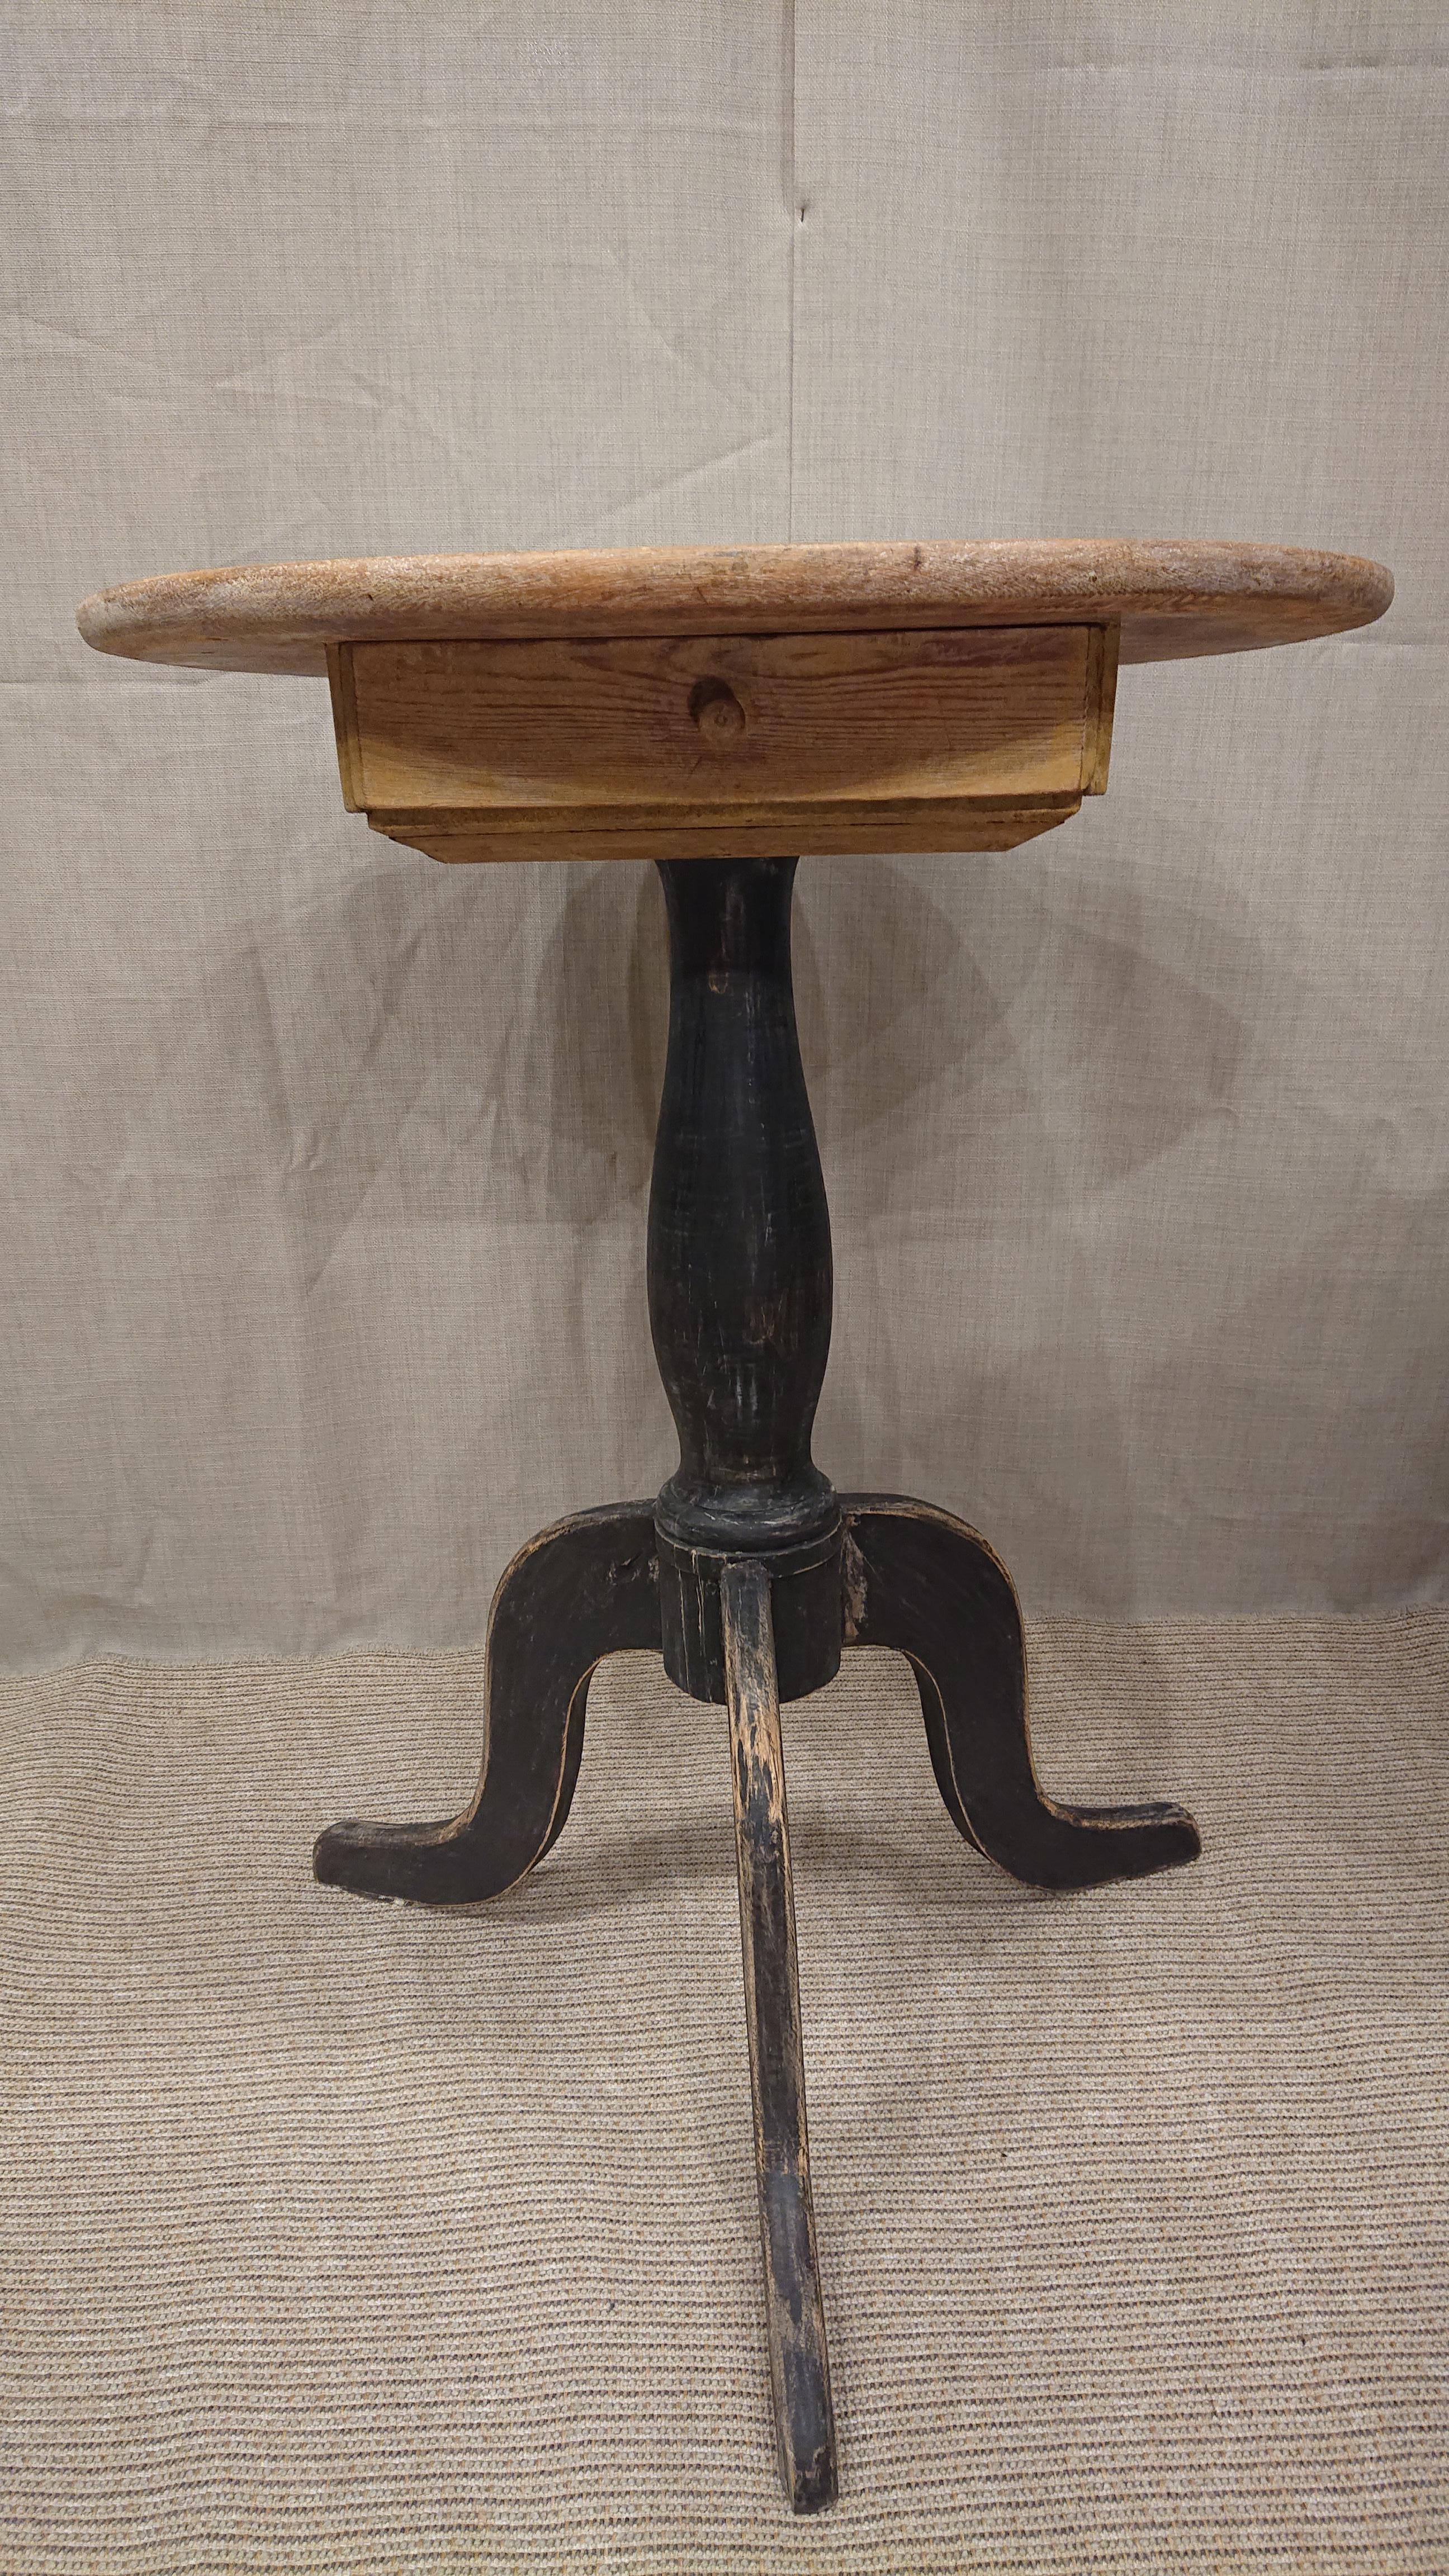 19th century Swedish Empire pedestal table with original paint.
A very charming table with a drawer.
Scraped by hand to its original color.
Turned base supported by beautifully carved legs.
The wood is healthy and the frame is solid.
Made in